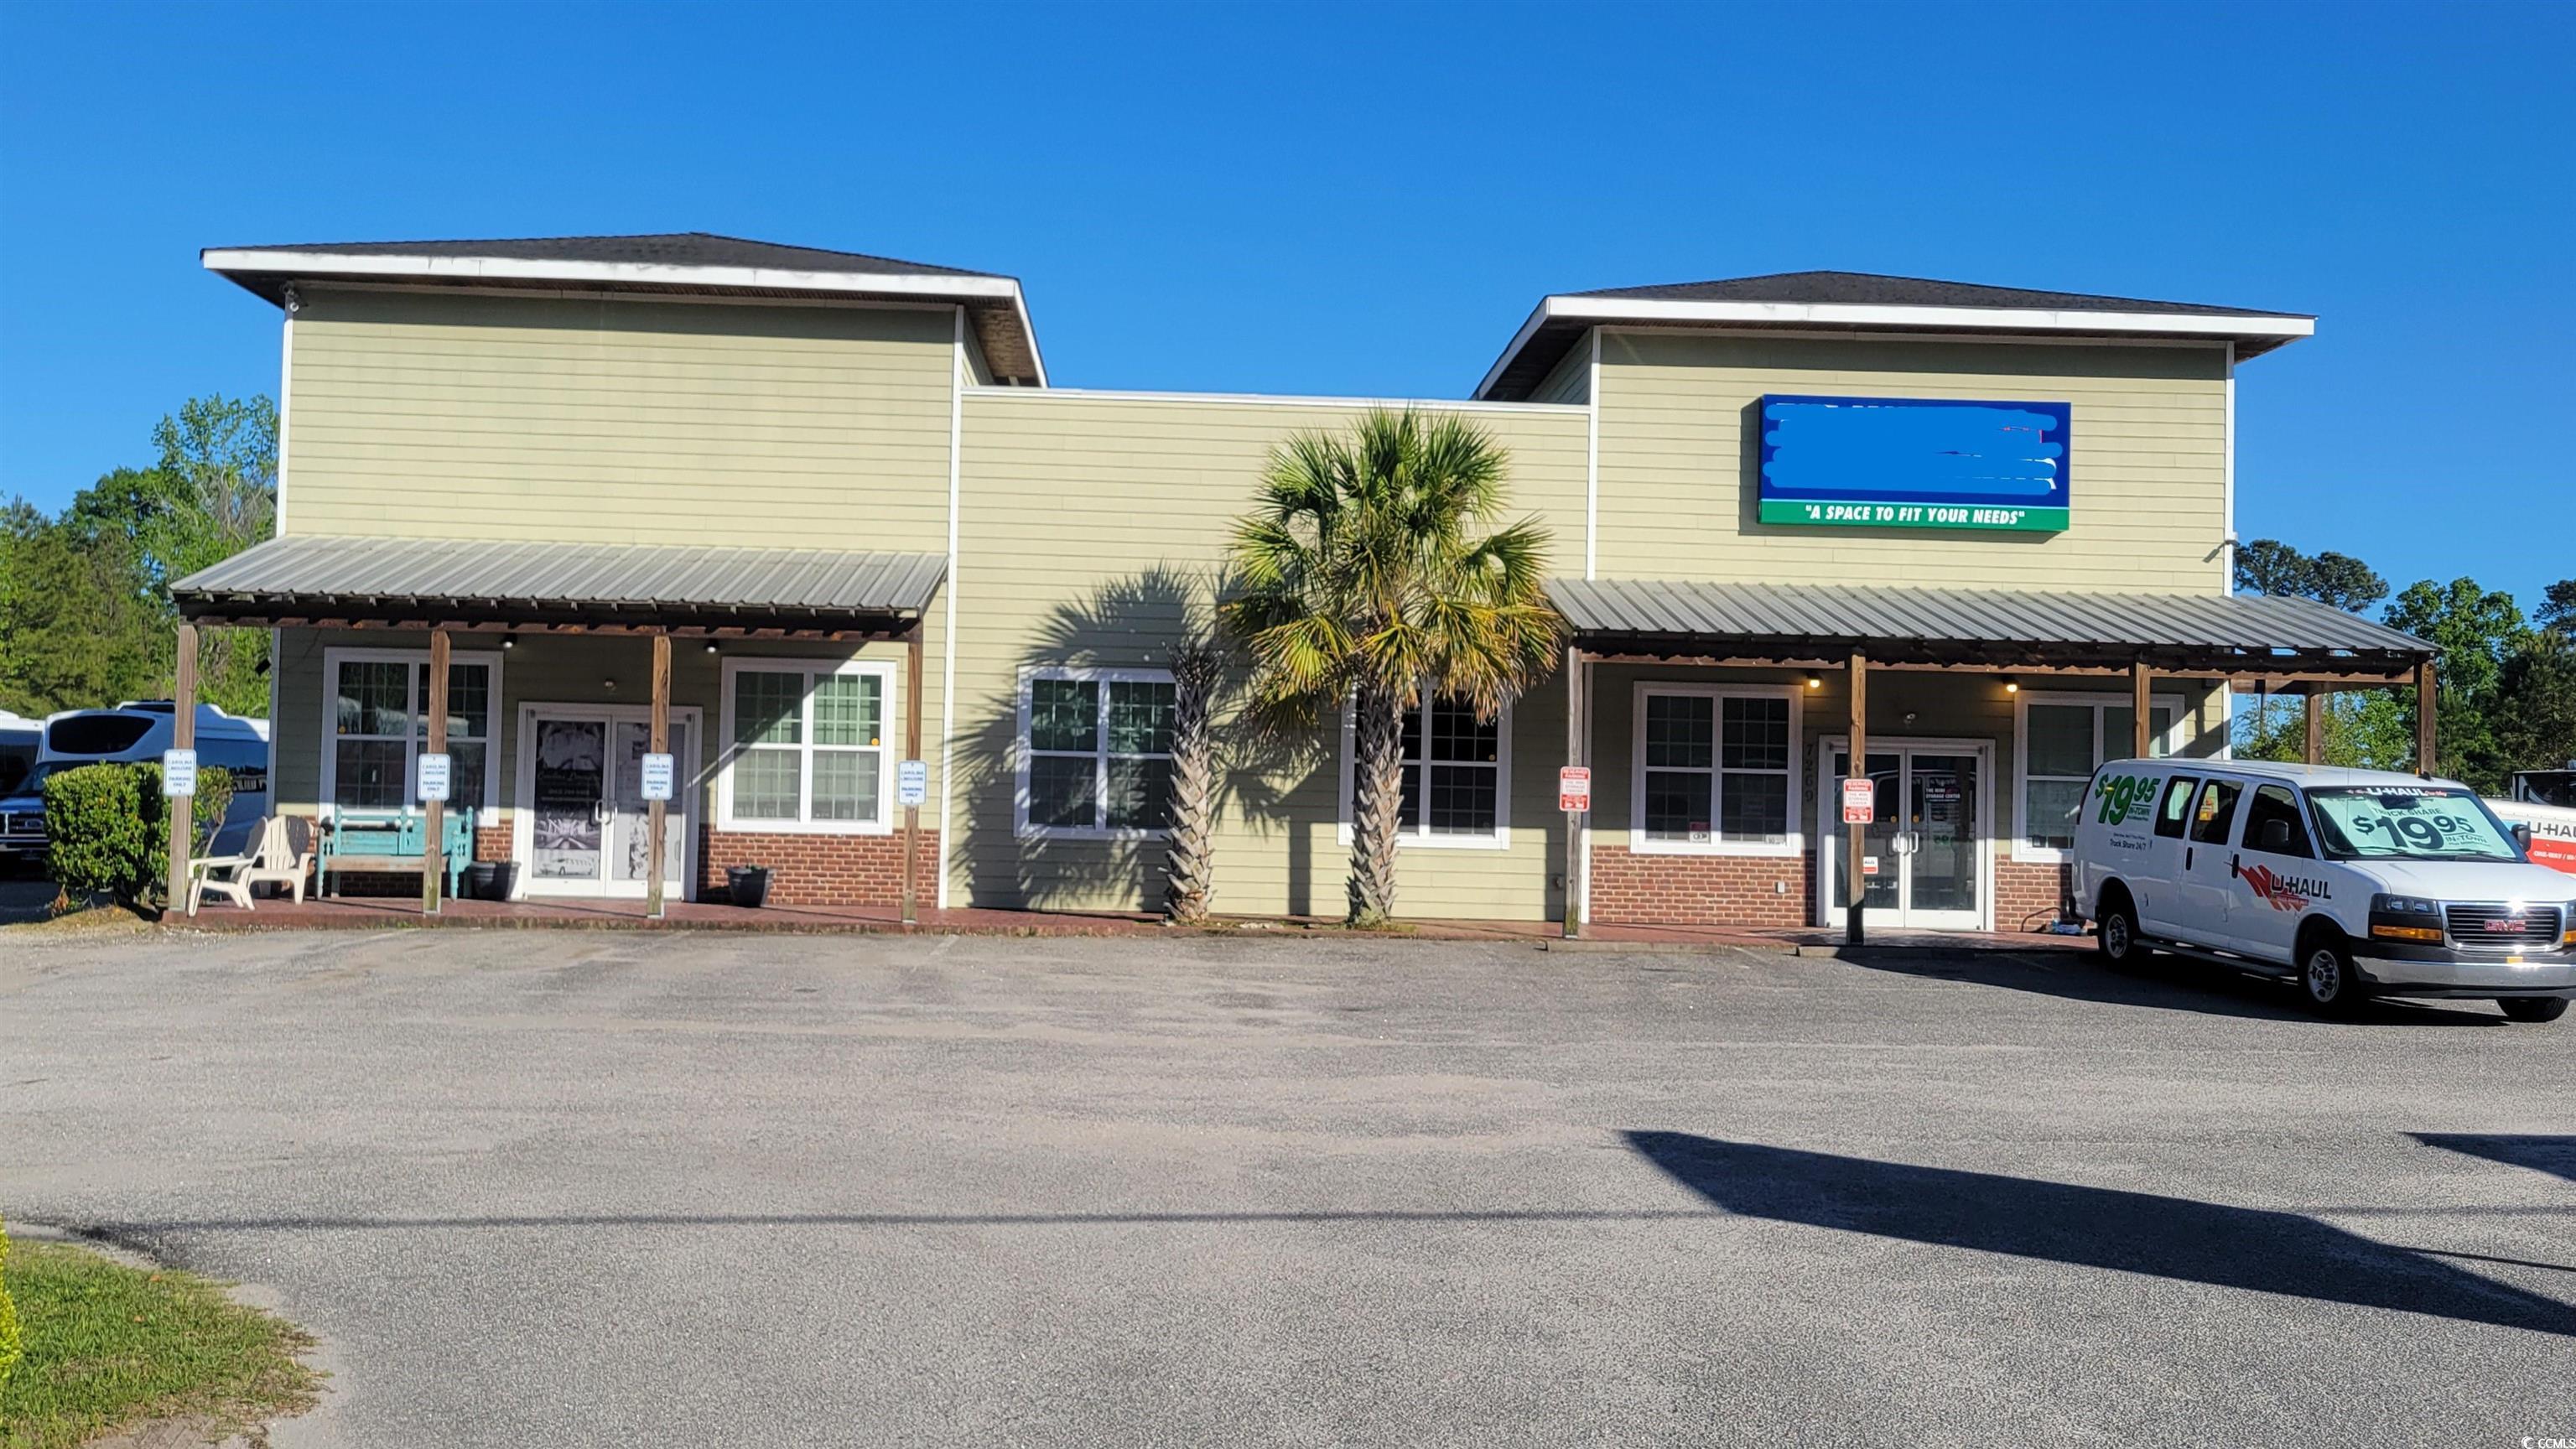 1,400 sq ft of office/retail space with app. 800 sq ft of adjacent garage/work shop space including a large roll up door, available starting on or about july 1st, 2024. excellent visibility along a busy hwy 707, close to the intersection with hwy 31. also close to socastee, surfside and hwy 544. plenty of options with the use of this space, easy access, plenty of parking, 3-year lease term preferred.